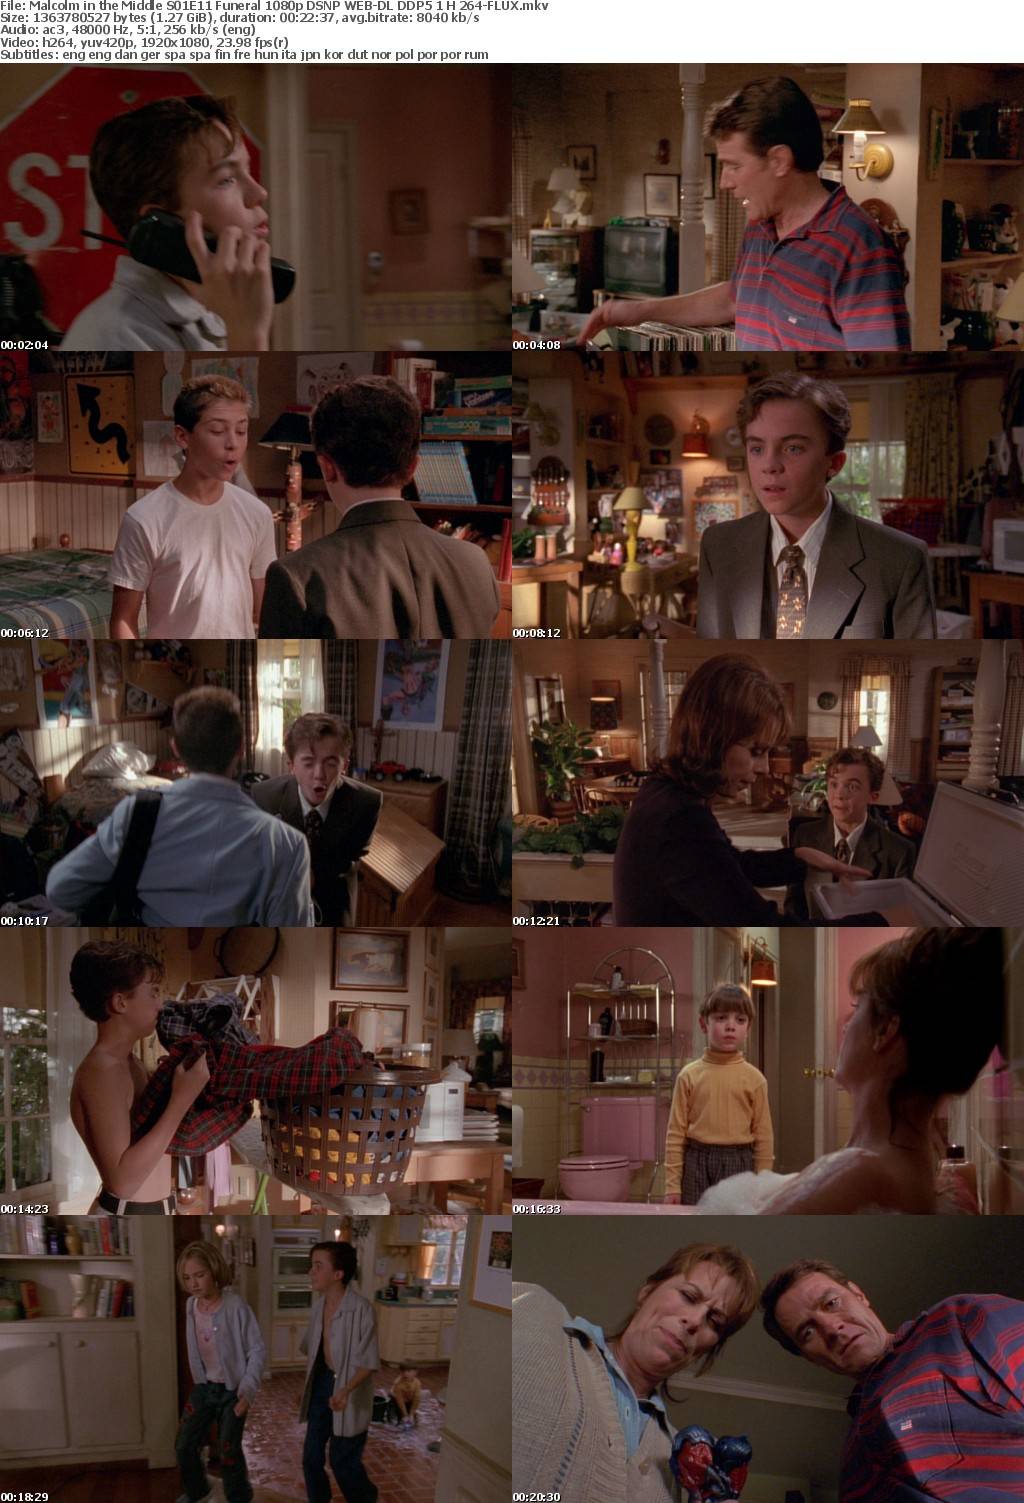 Malcolm in the Middle S01E11 Funeral 1080p DSNP WEB-DL DDP5 1 H 264-FLUX